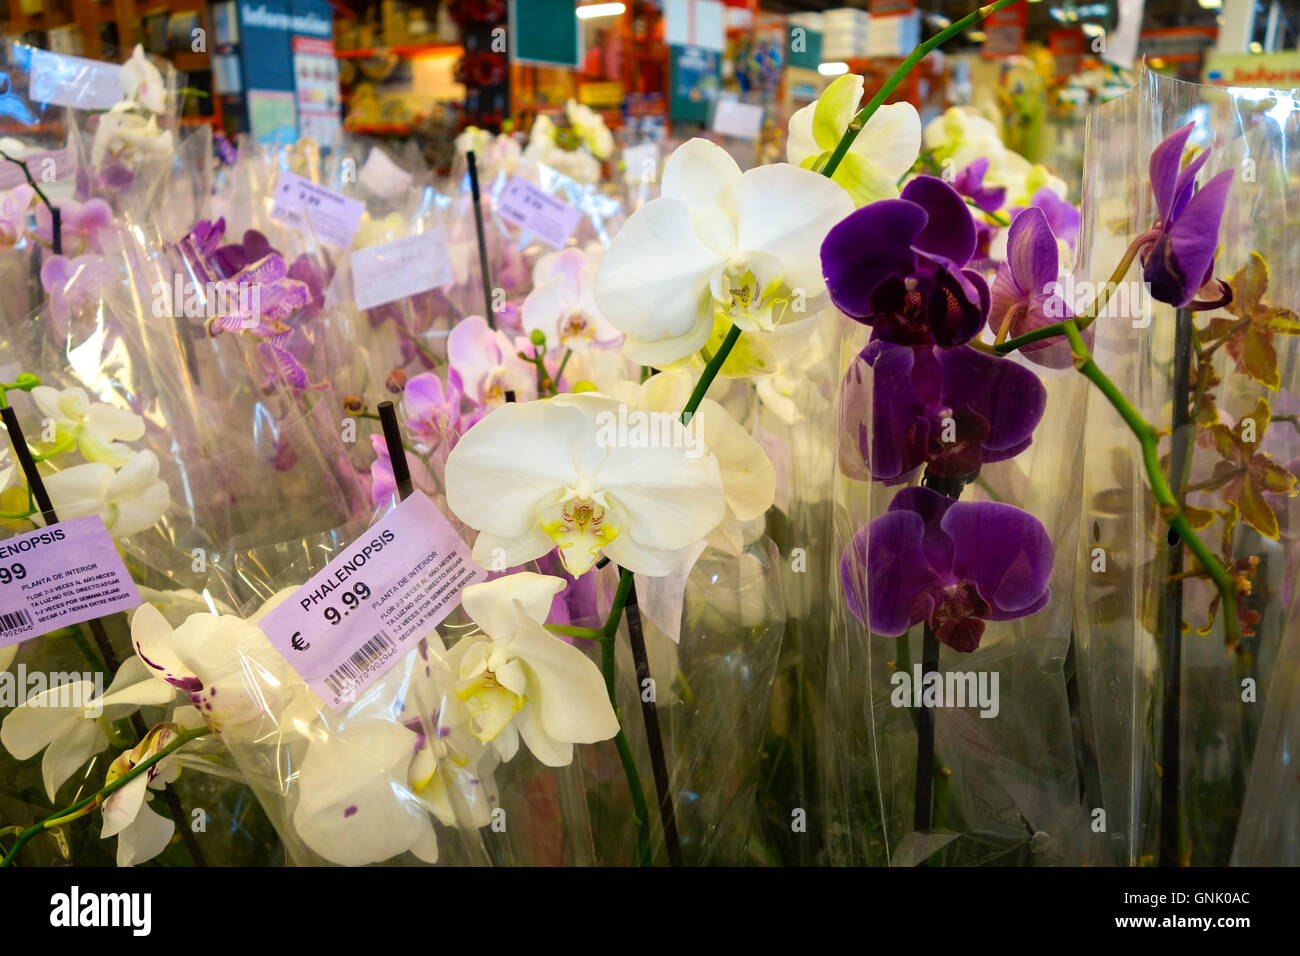 Moth orchids, phalaenopsis on display for sale in flower store, shop, Spain. Stock Photo